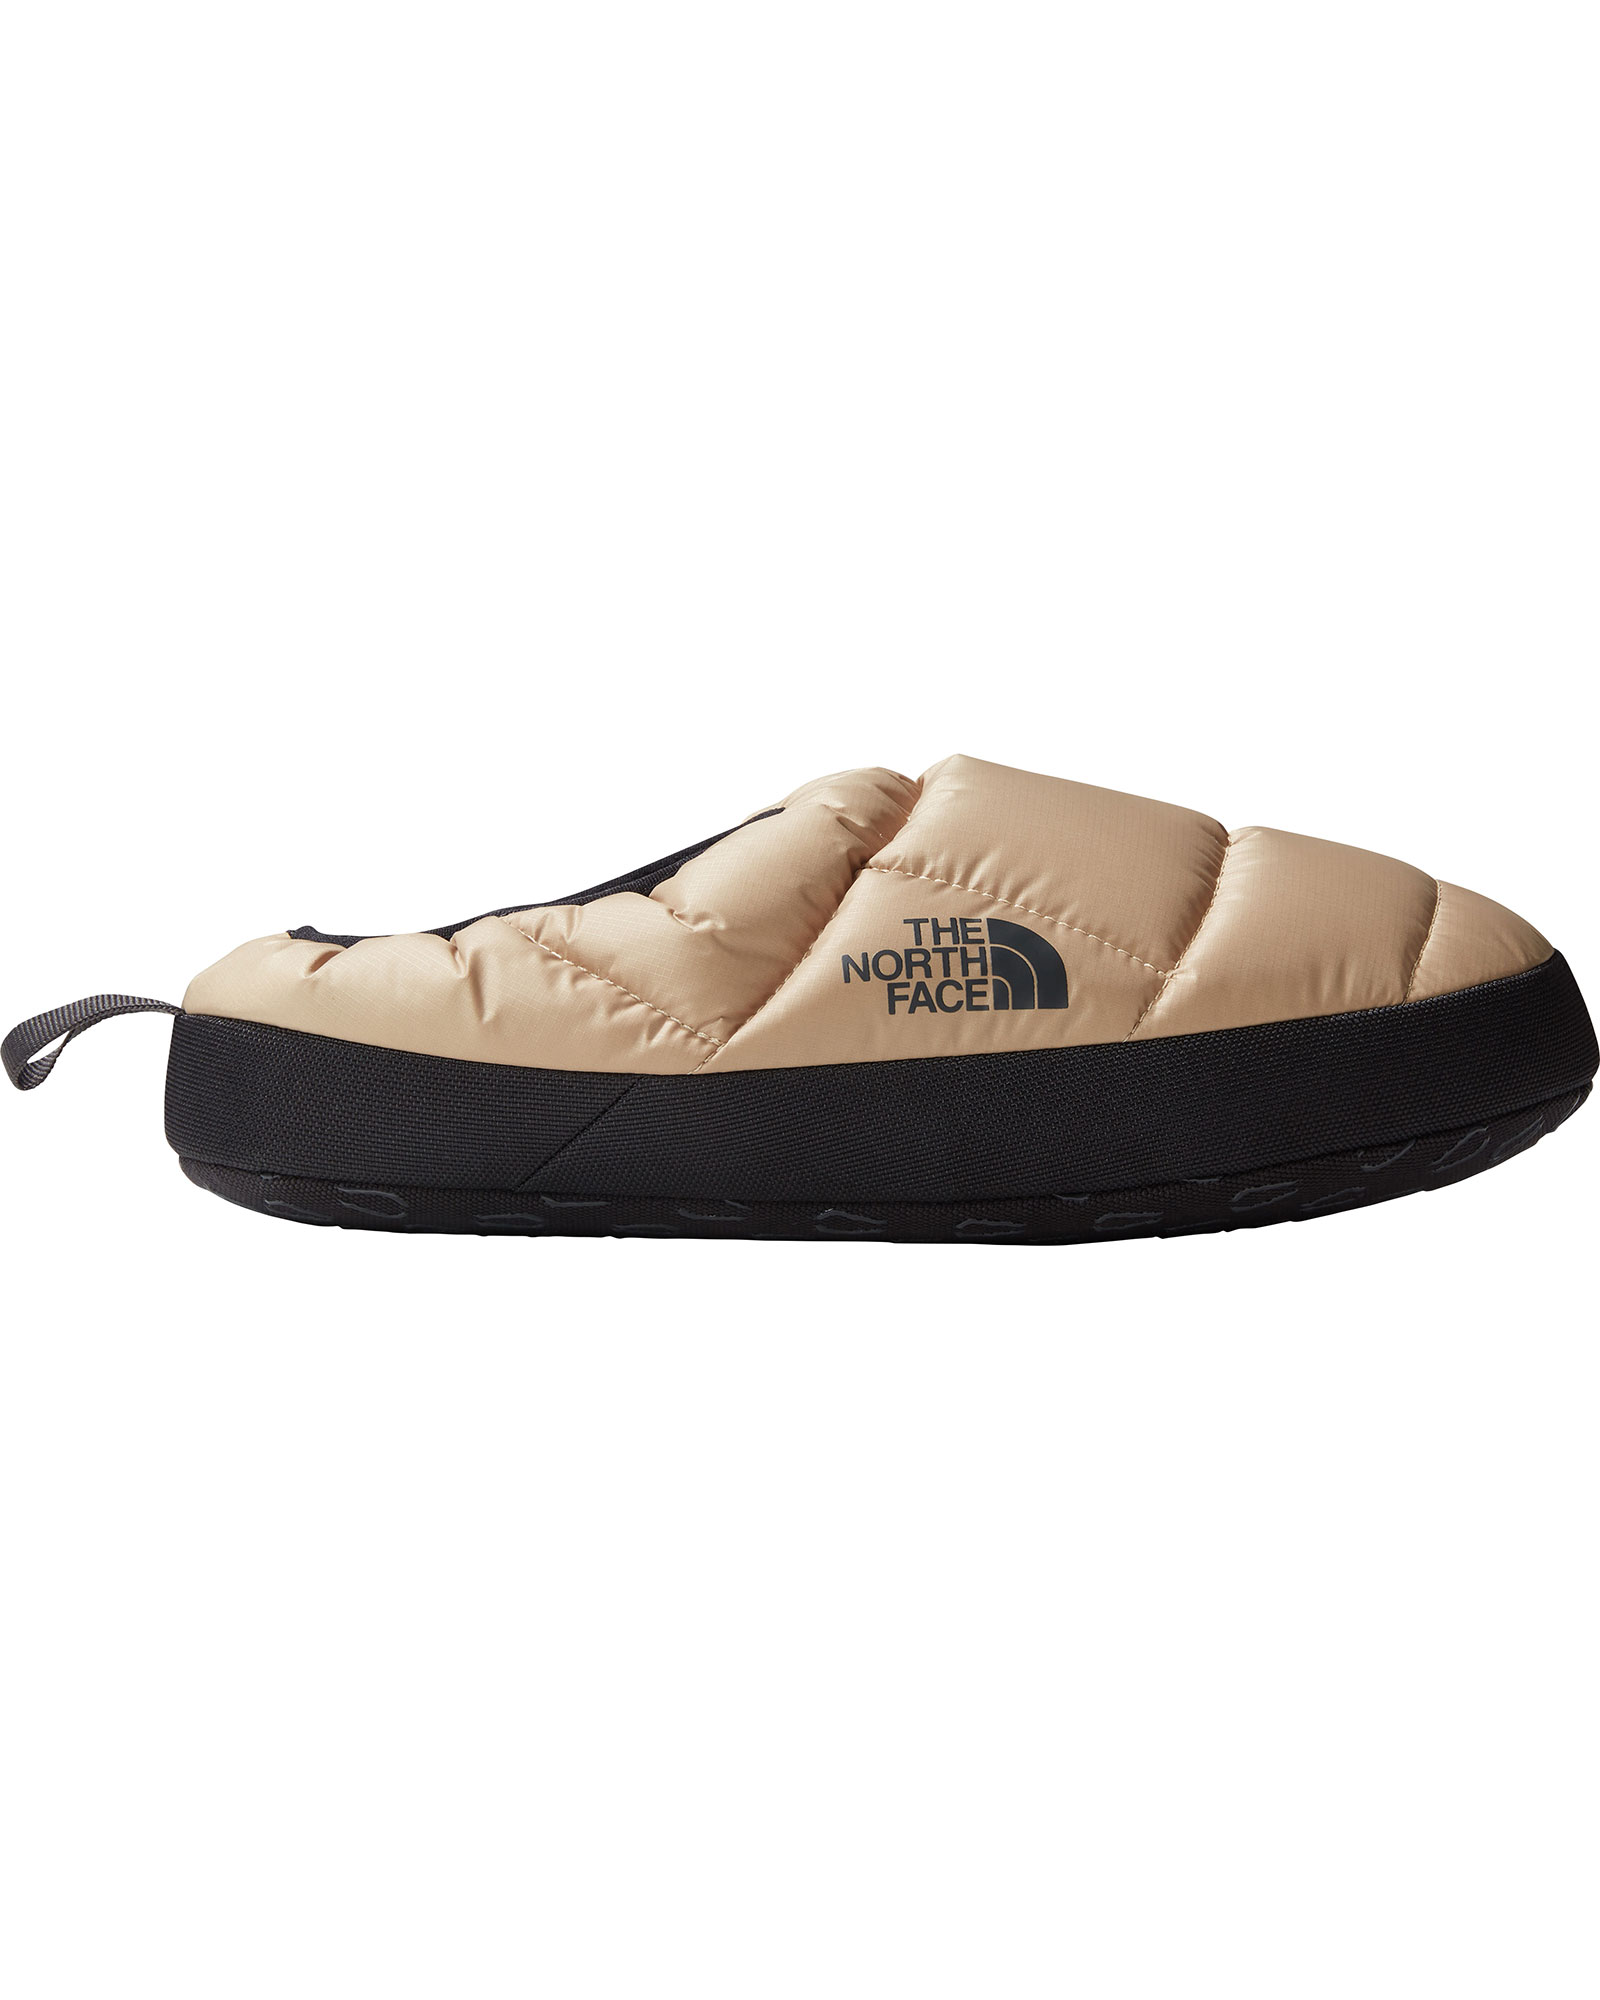 The North Face Men's ThermoBall NSE Mules III